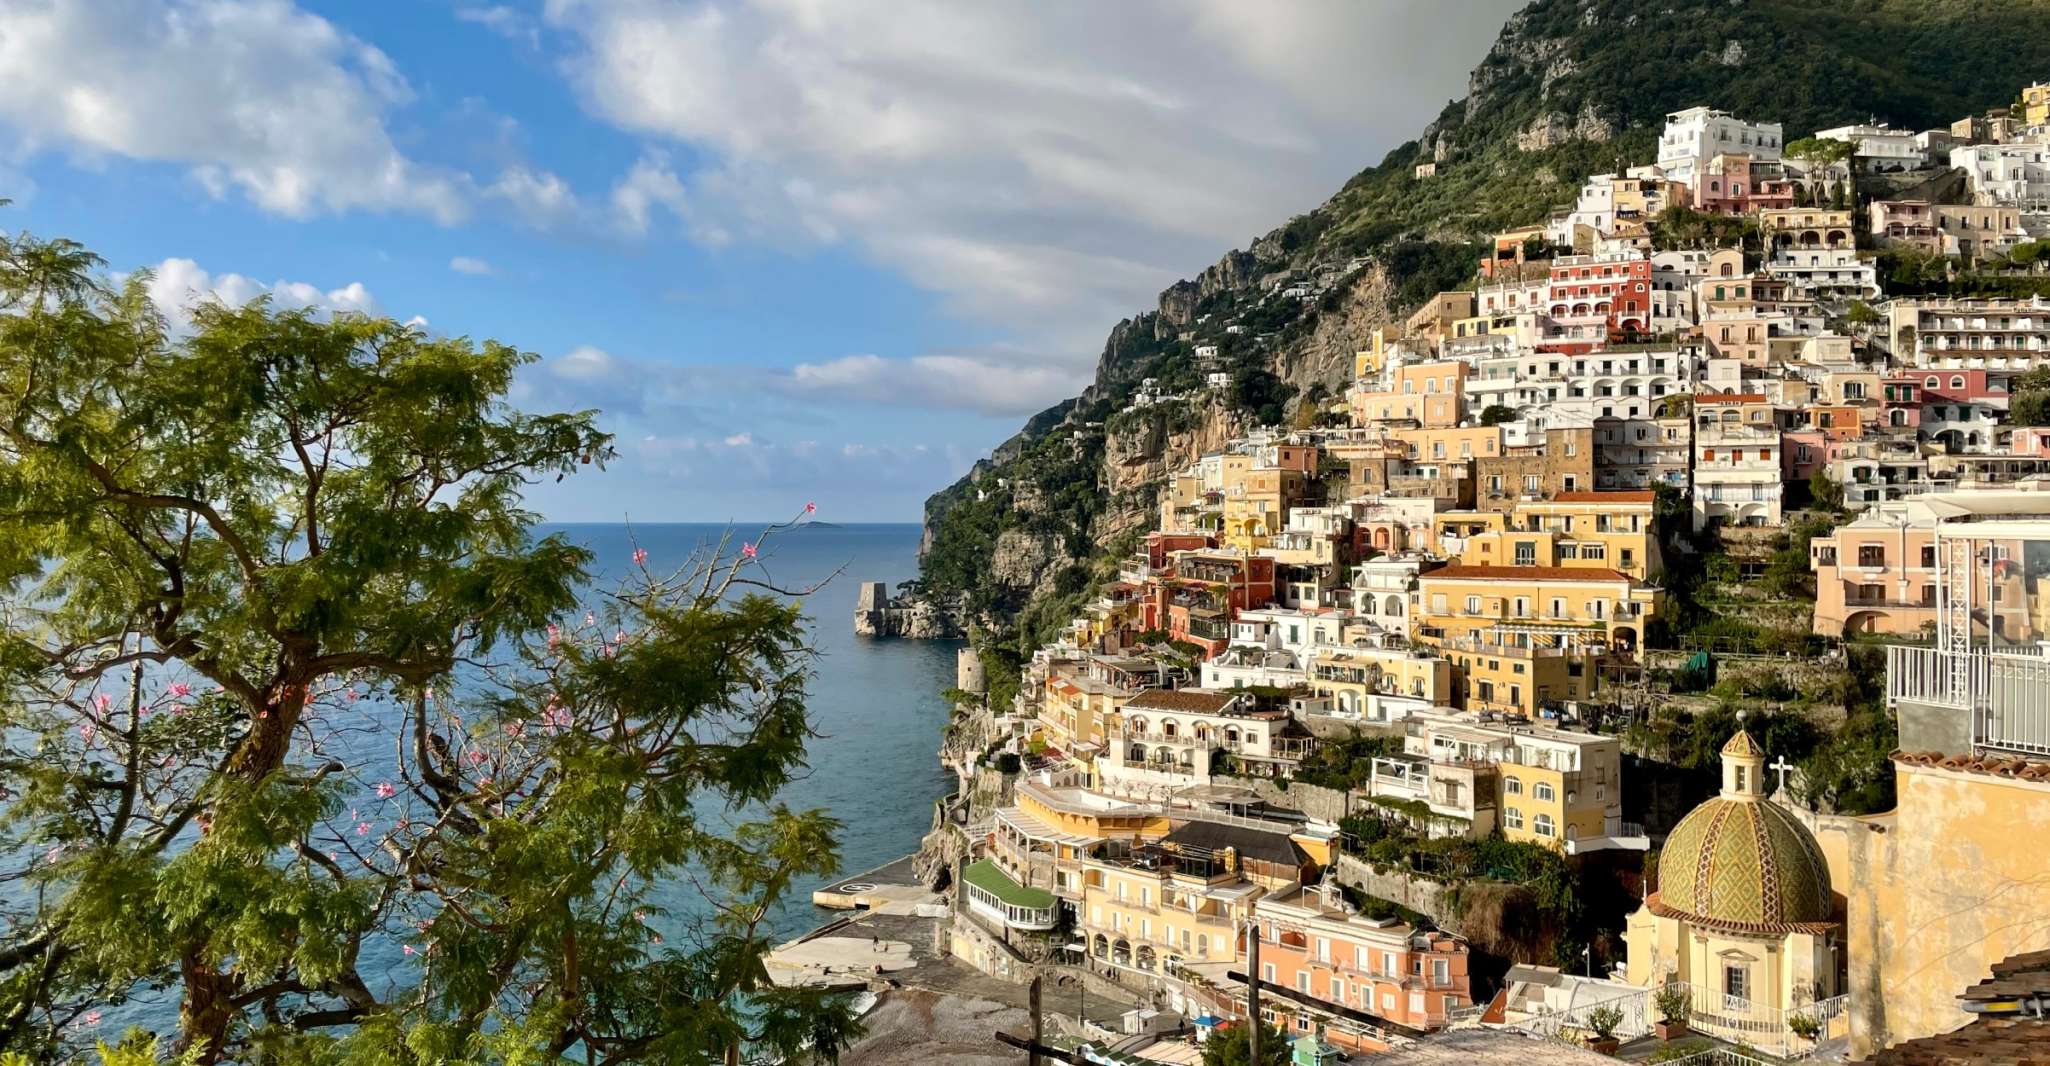 Positano, Old Town Walking Tour with Archaeologist Guide - Housity